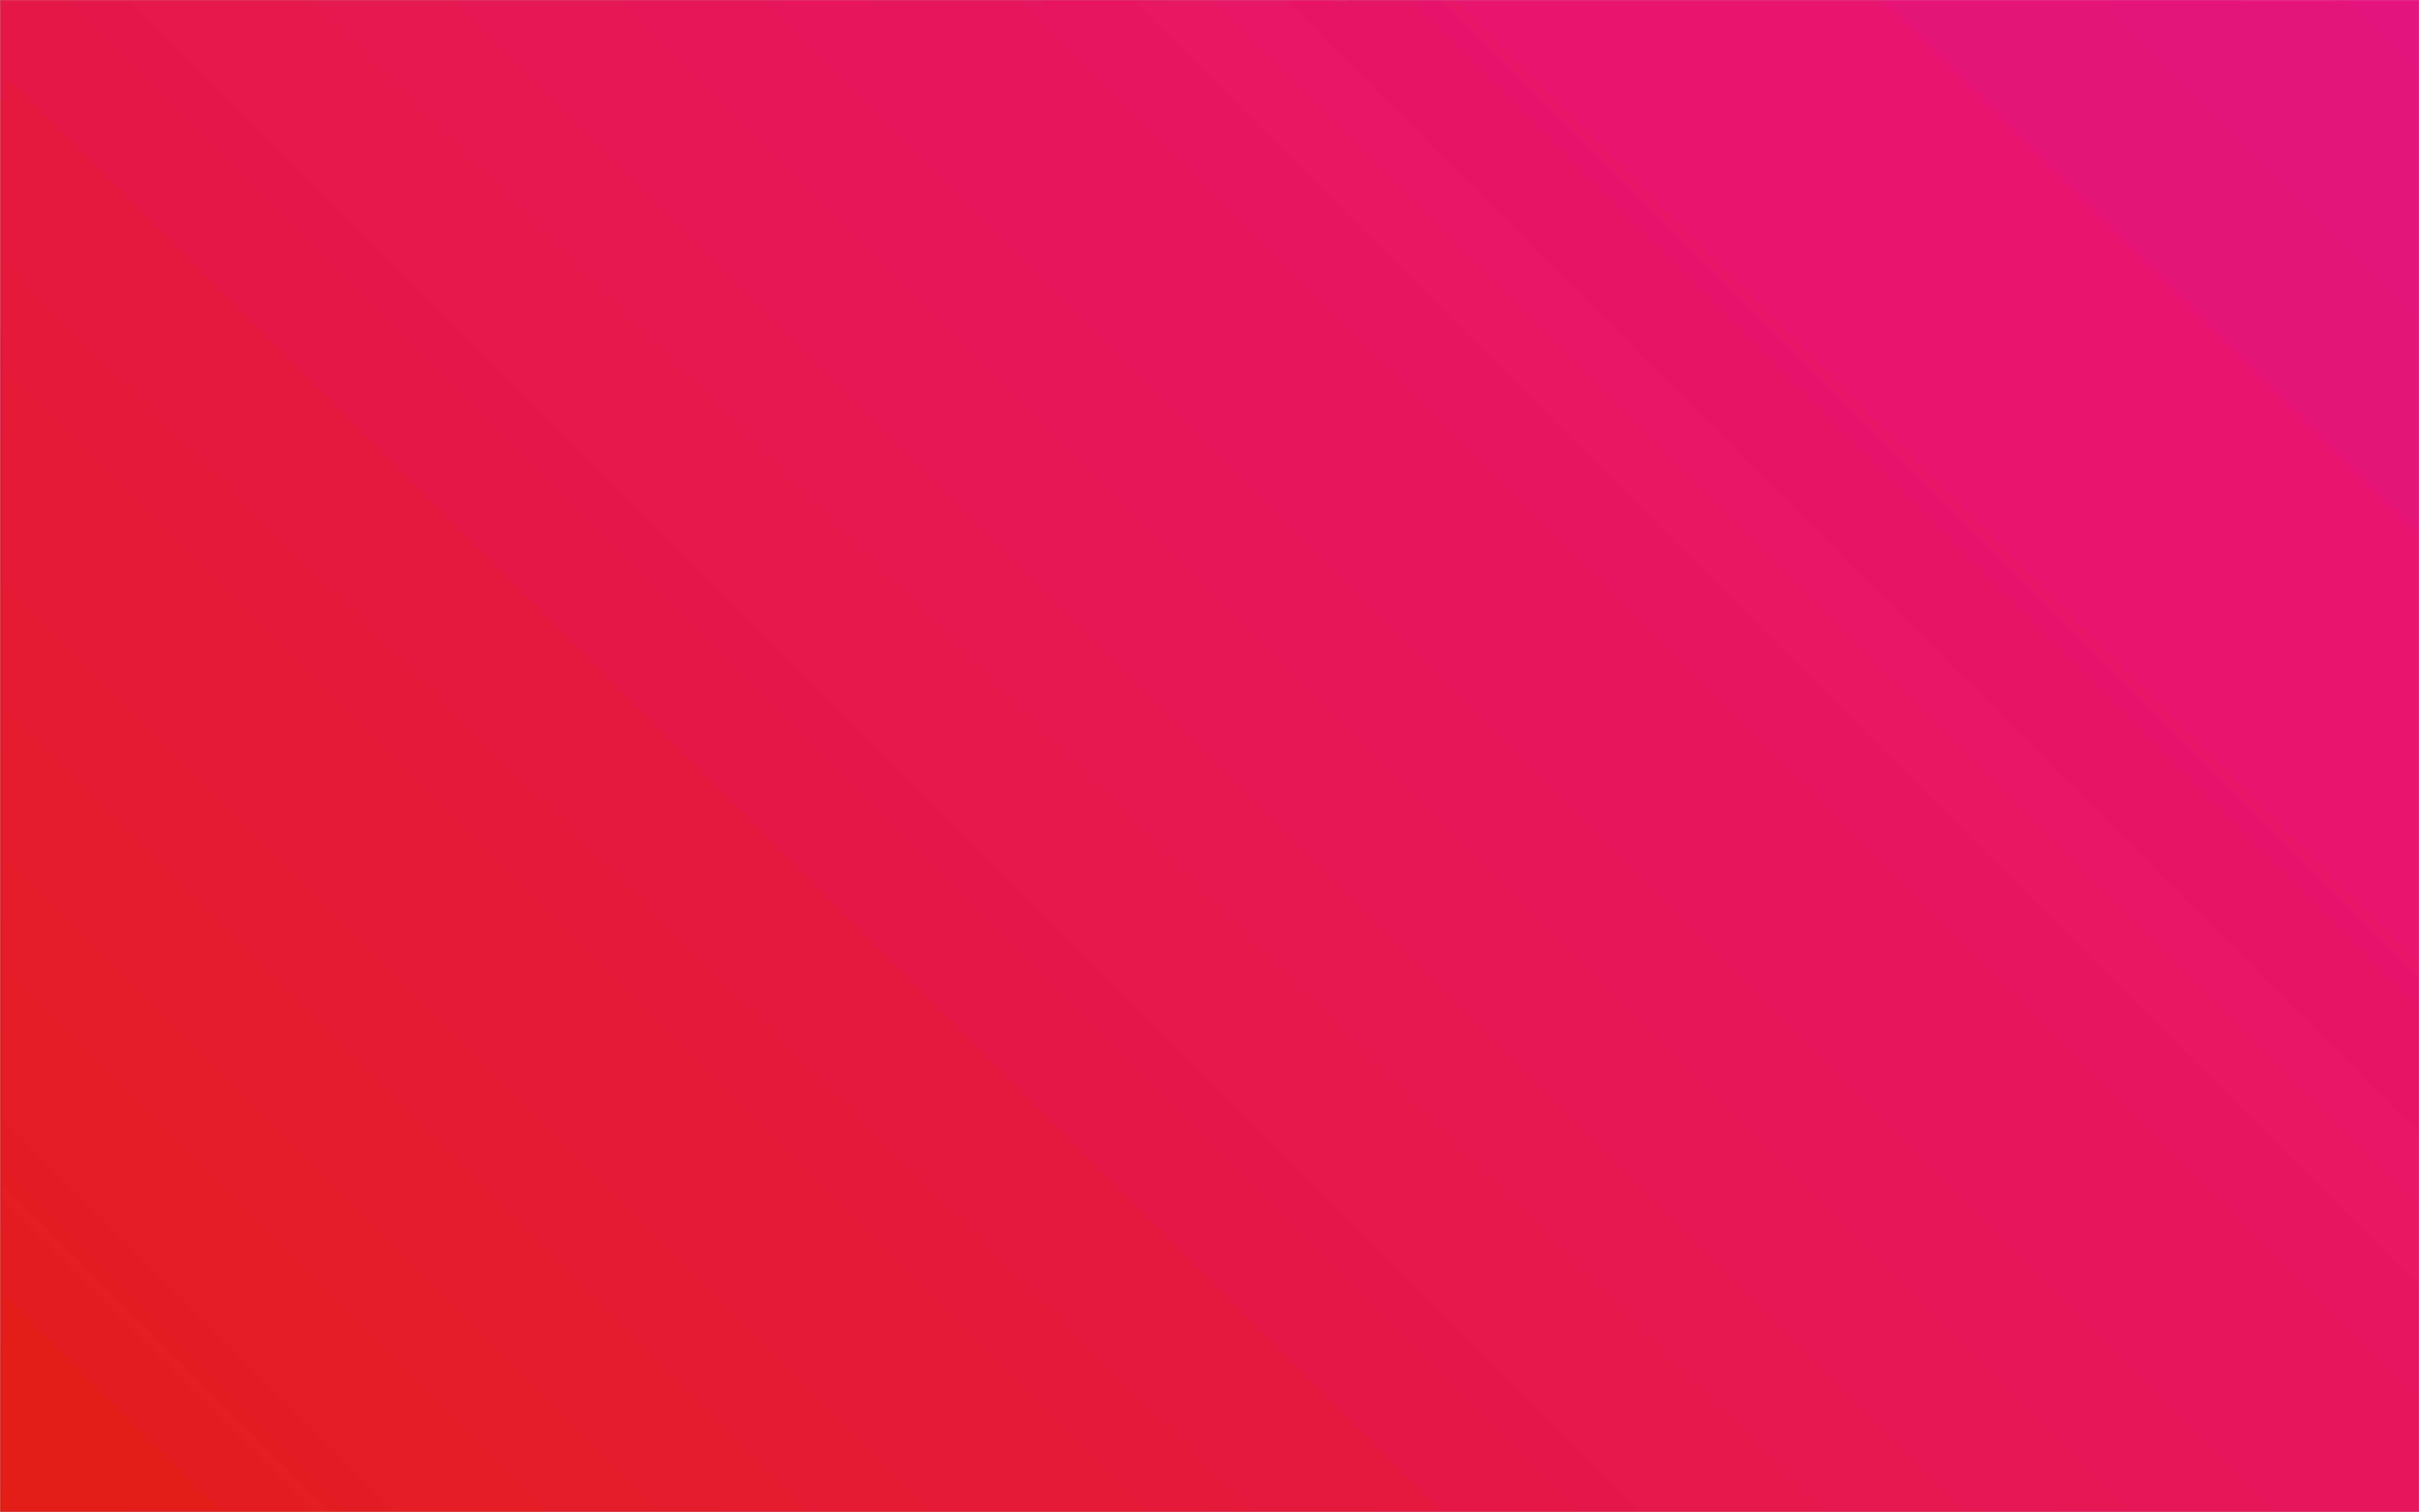 Pink Gradient Background Free Images And Graphic Designs